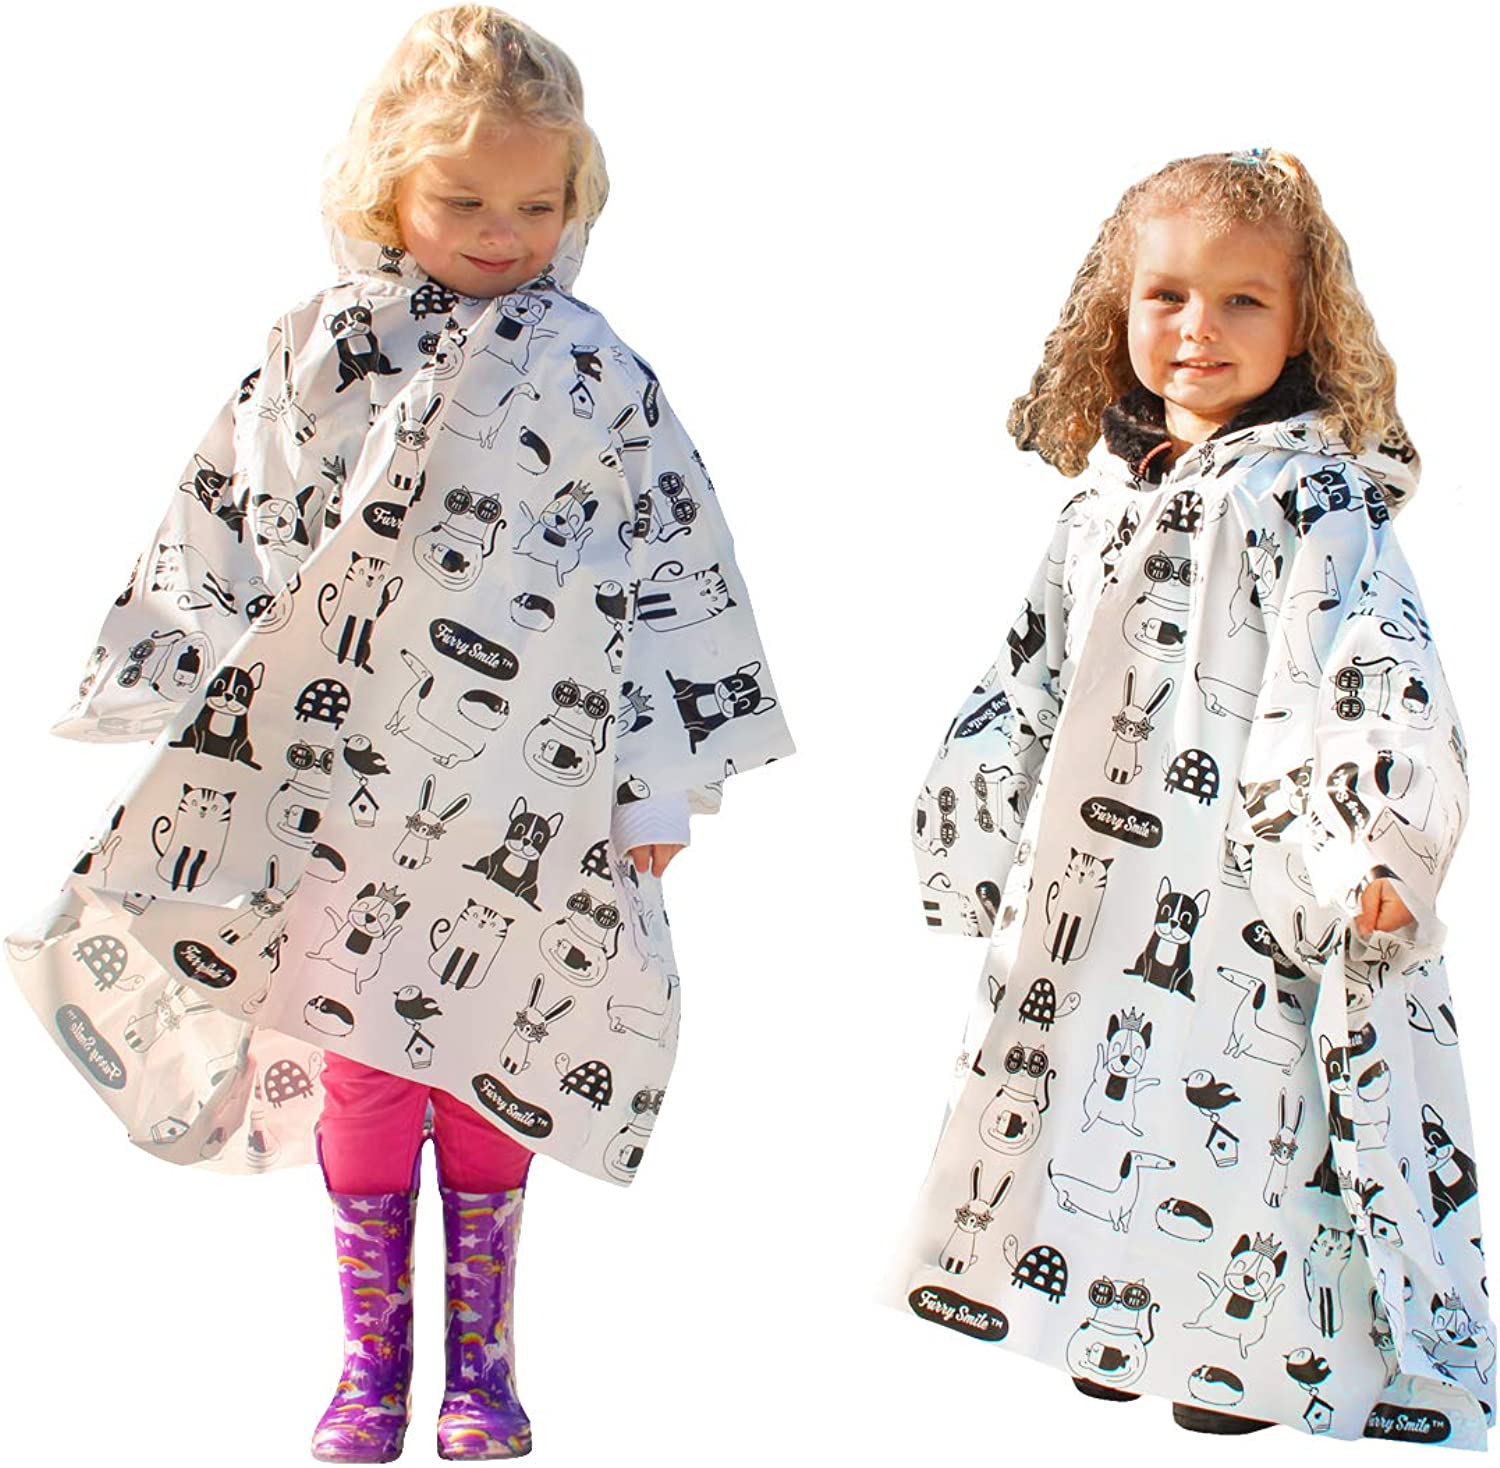 Kids Rain Poncho with Hood (4 Pack) – Waterproof Disposable Rain Ponchos for Kids – Emergency Survival Kit – Camping Hiking Travel and Theme Parks – Cute and Fun Animal Print for Boys or Girls